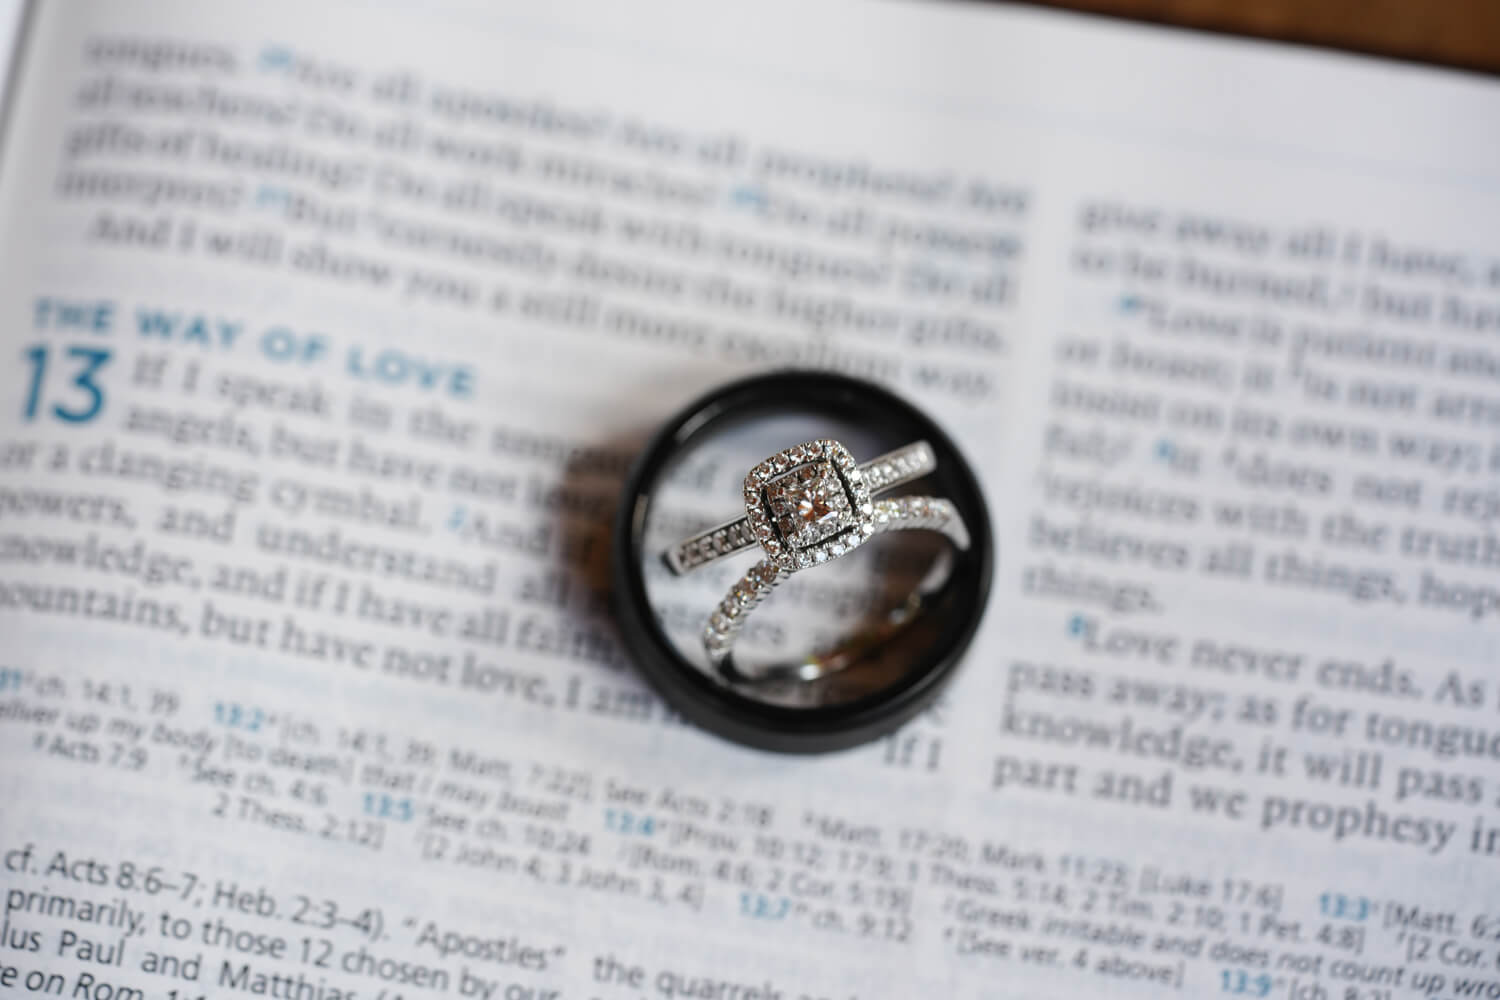 Black wedding band with silver wedding rings with diamonds inside it sitting on a Bible at a passage called the way of love